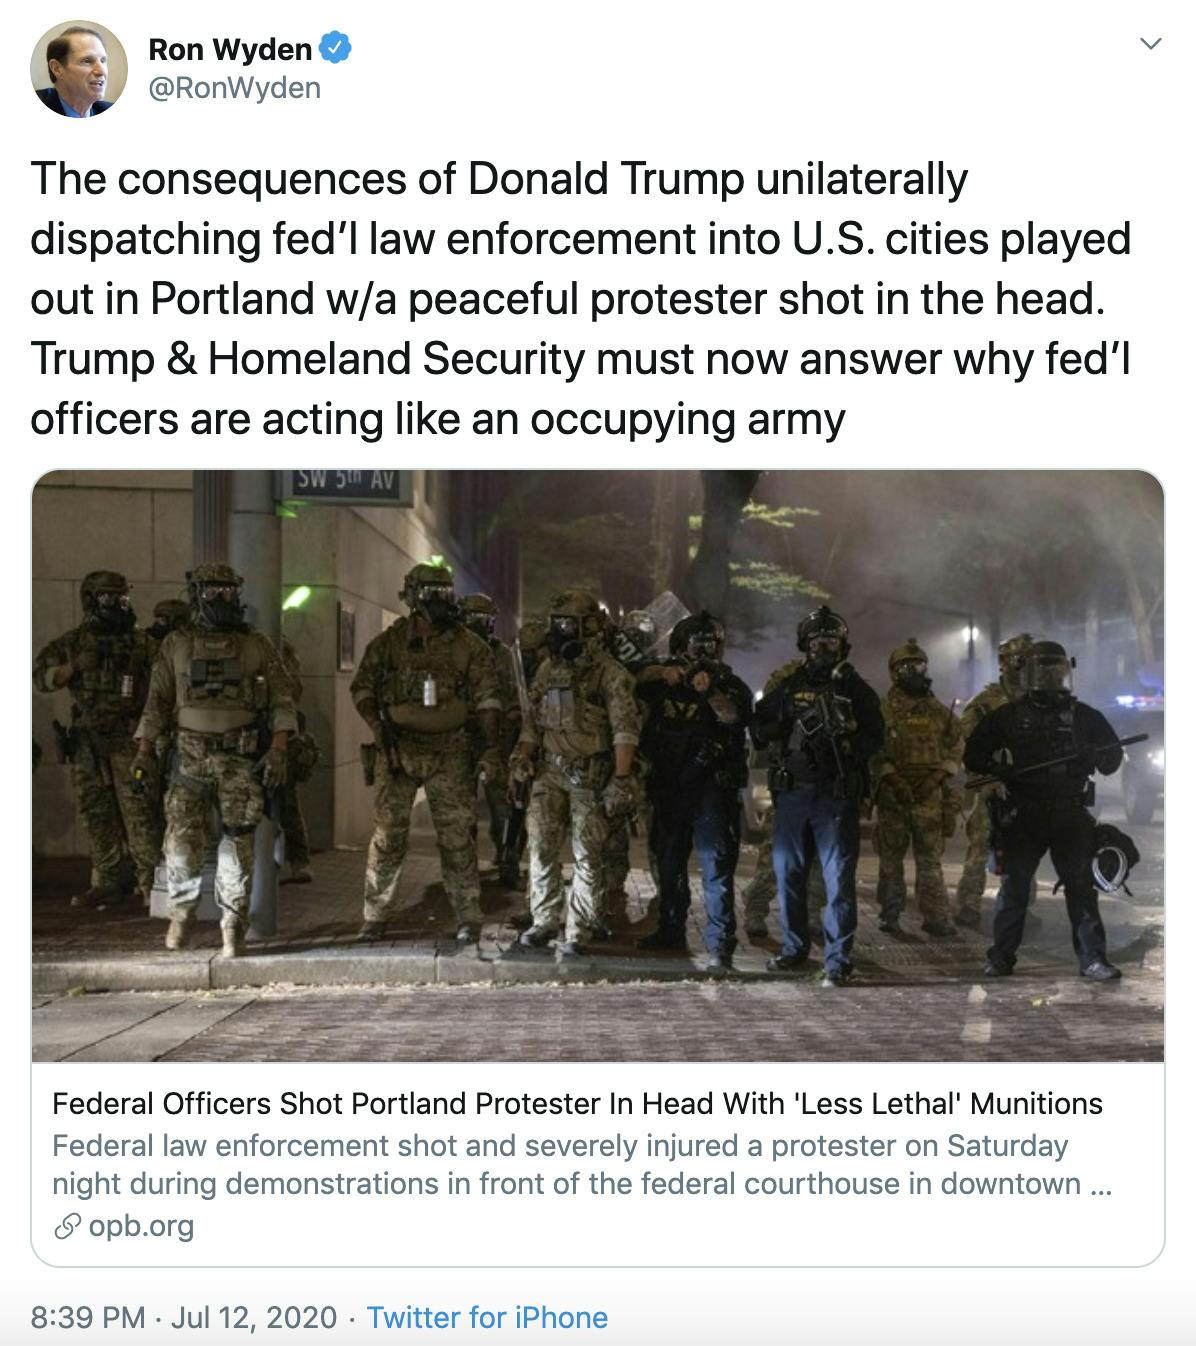 The consequences of Donald Trump unilaterally dispatching fed’l law enforcement into U.S. cities played out in Portland w/a peaceful protester shot in the head. Trump & Homeland Security must now answer why fed’l officers are acting like an occupying army